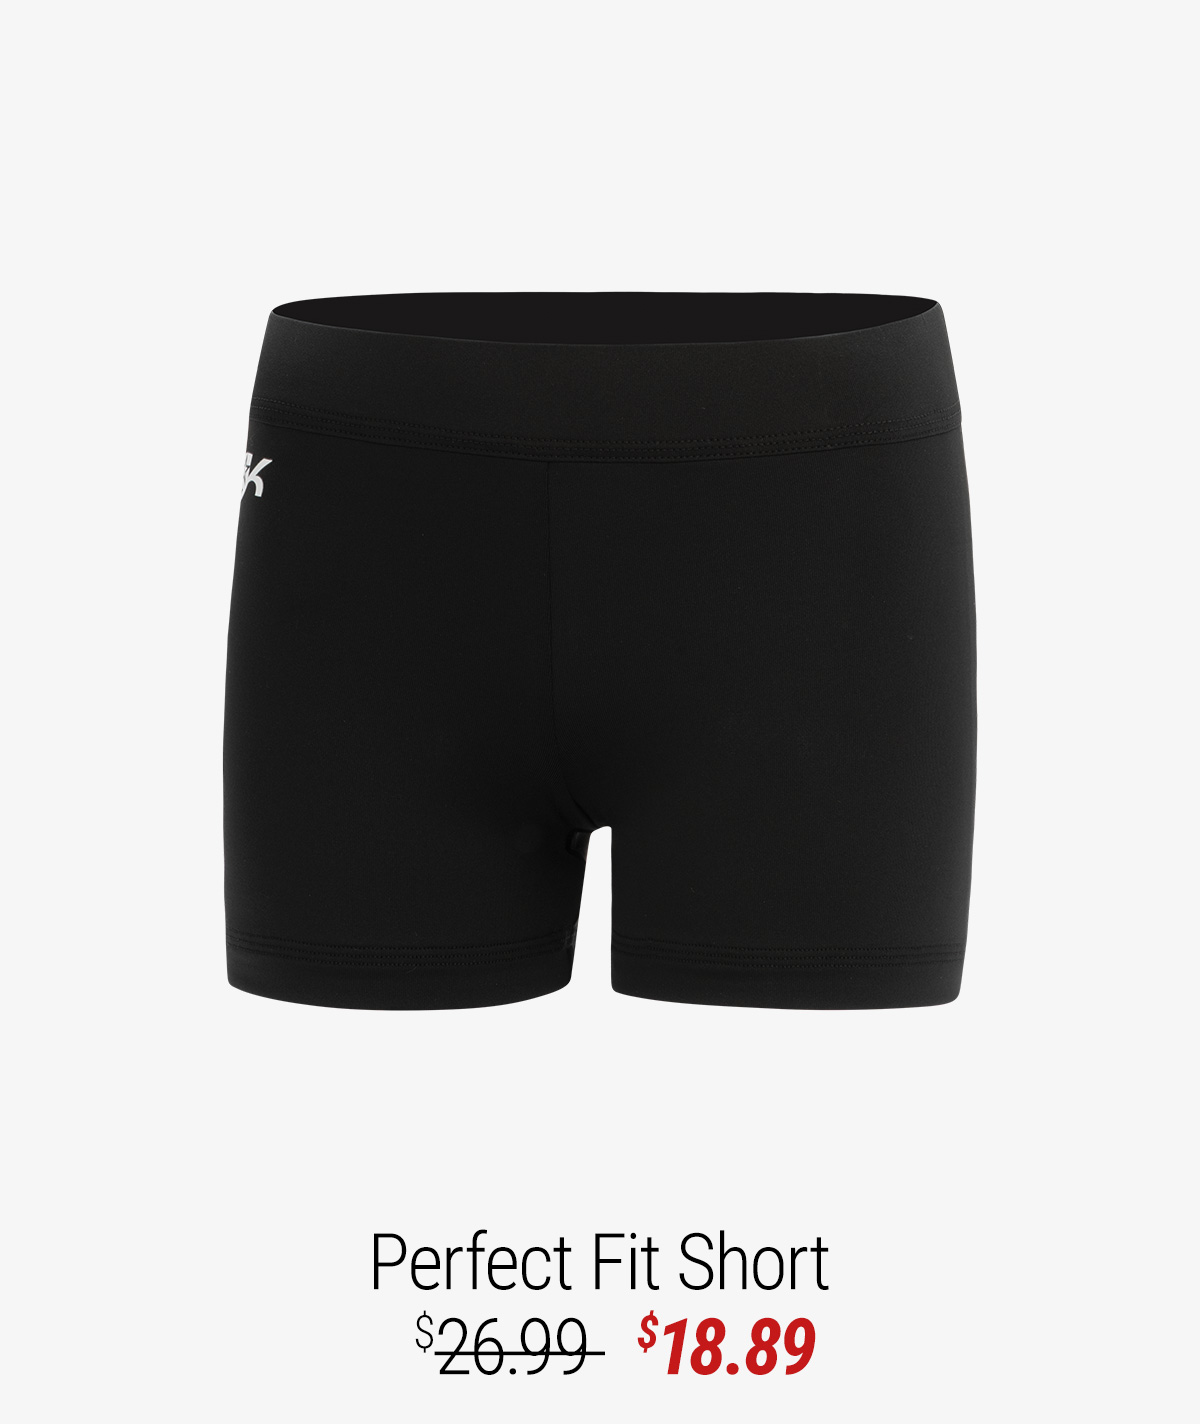 GK ALL STAR PERFECT FIT SHORT